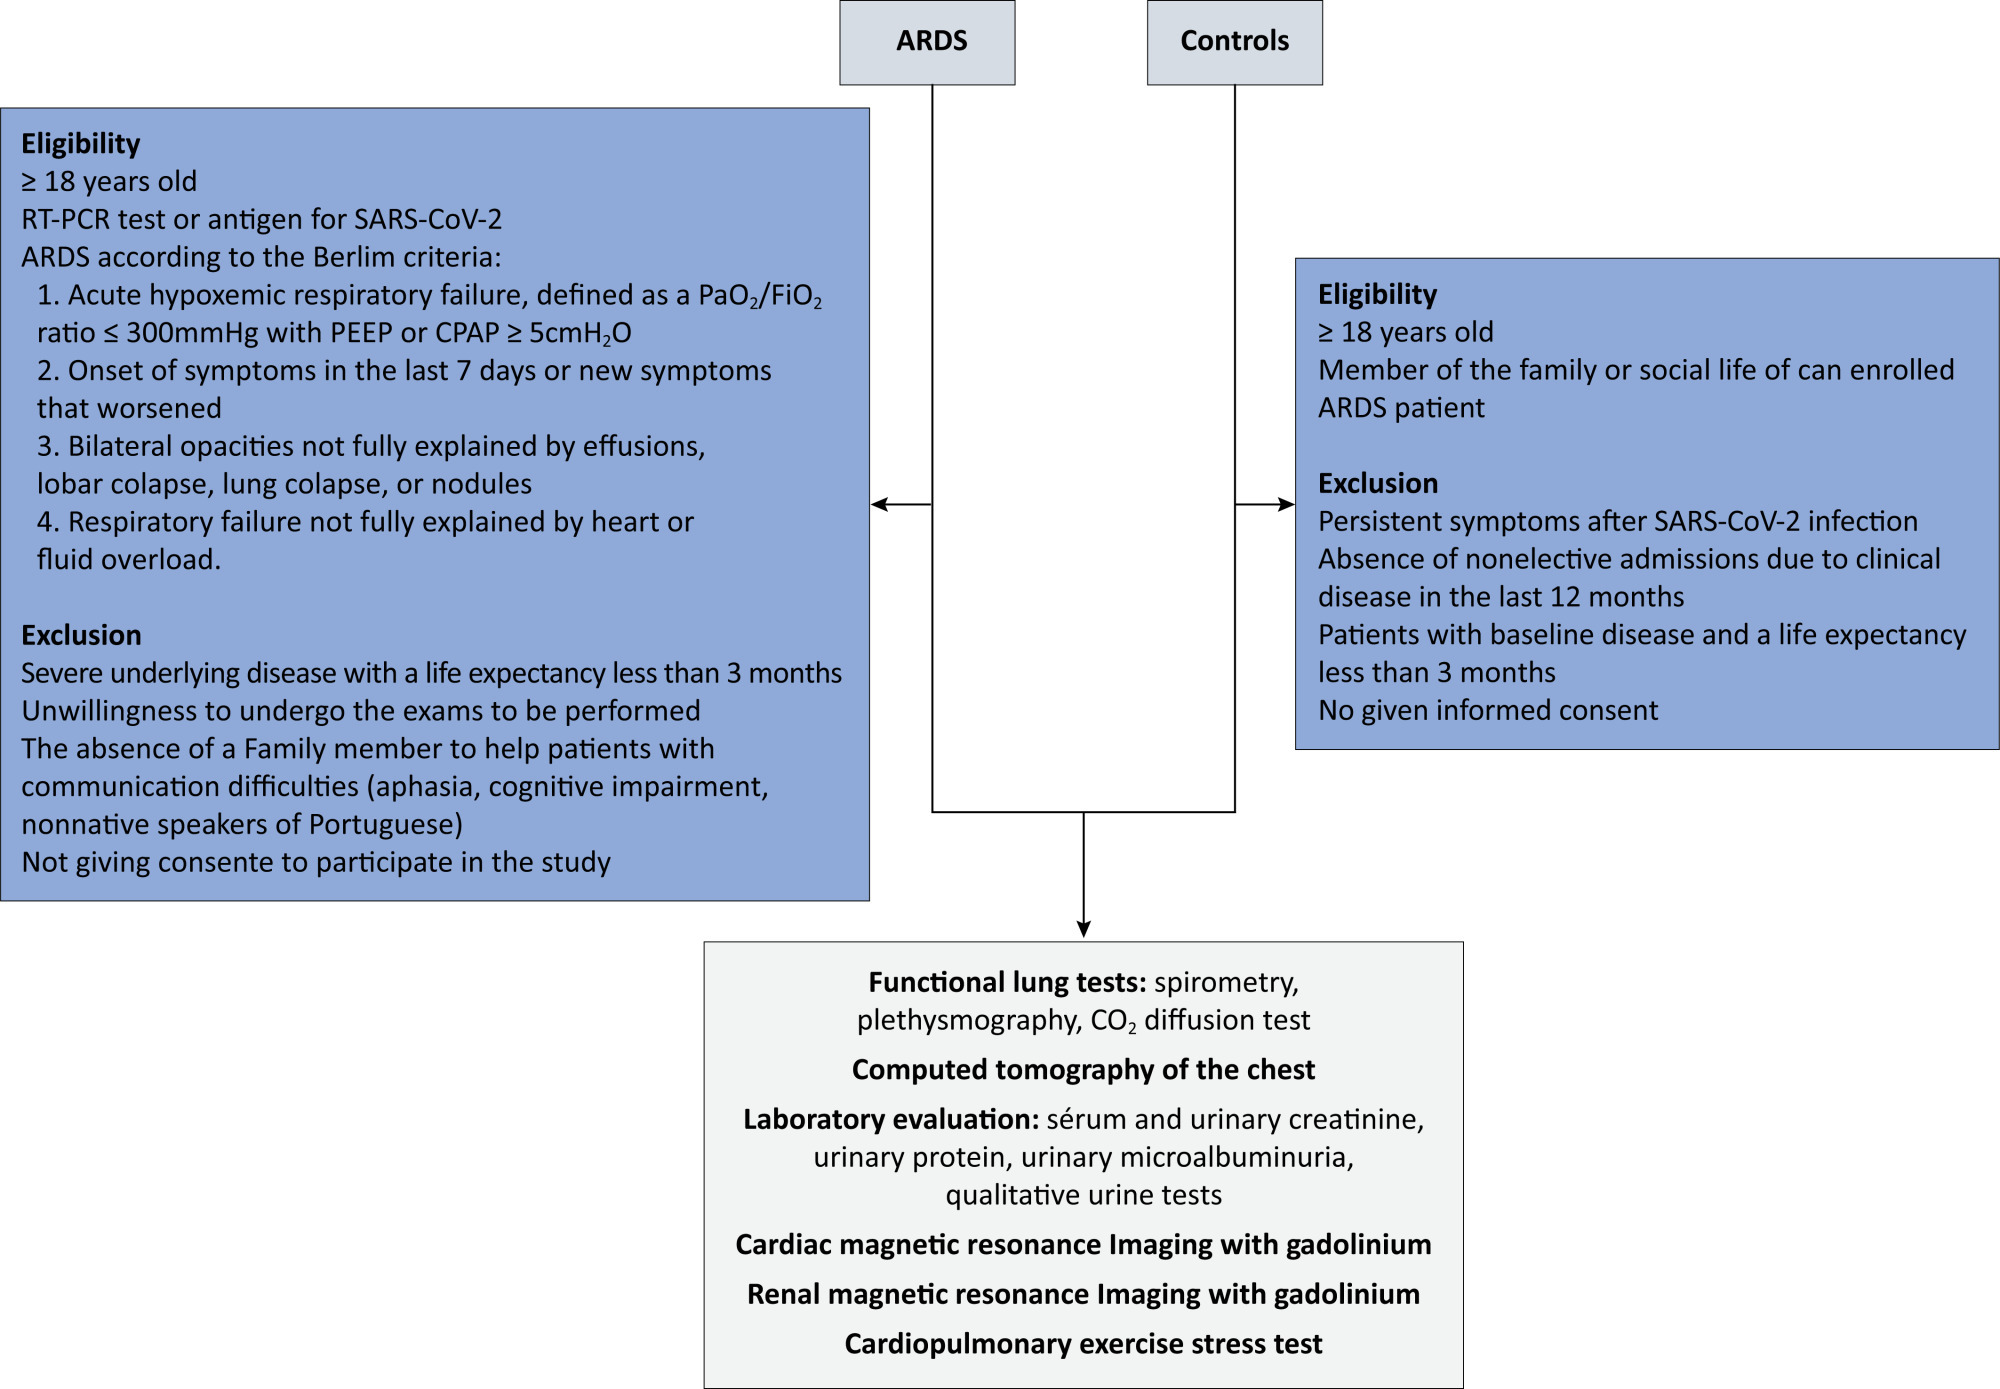 Impact on pulmonary, cardiac, and renal function and long-term quality of life after hospitalization for acute respiratory distress syndrome due to COVID-19: Protocol of the Post-COVID Brazil 3 study